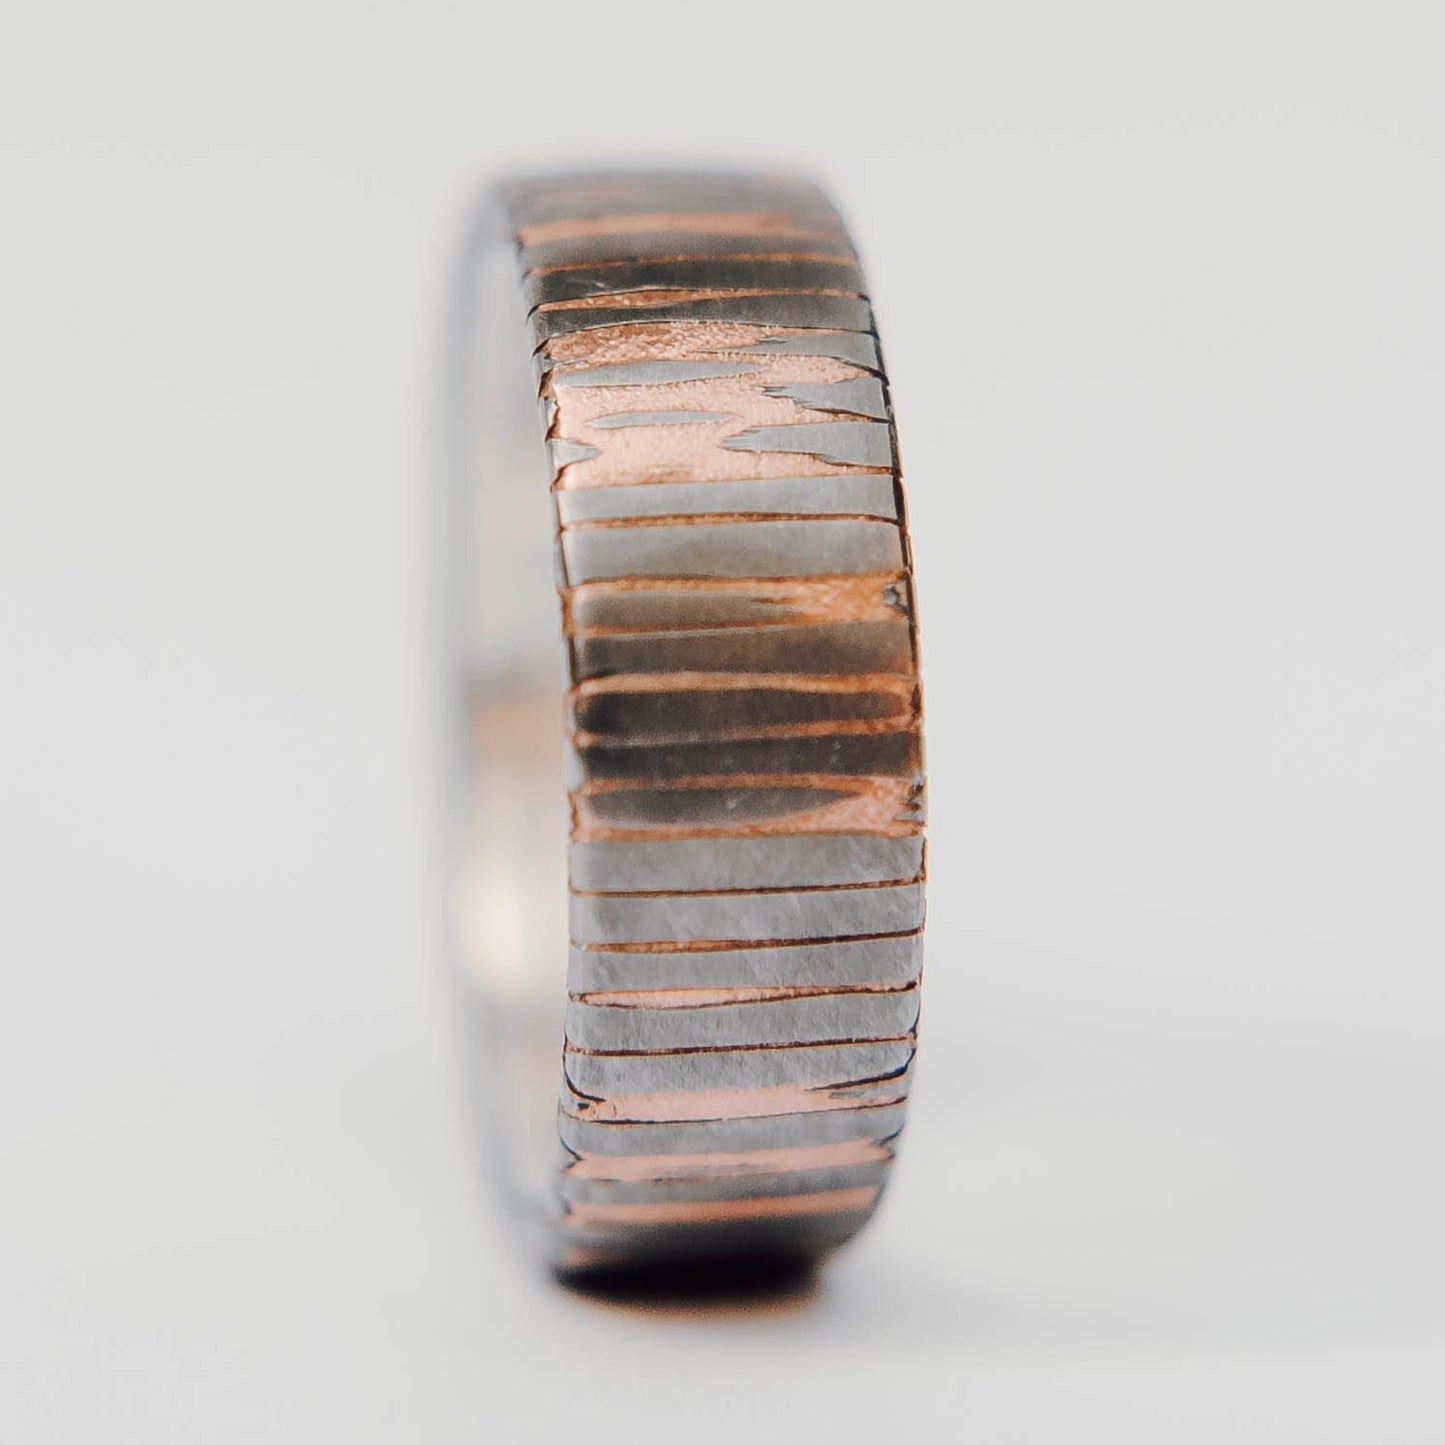 Superconductor wedding band. This photo shows an etched titanium-niobium and copper striped ring with silver liner. (Vertical with white background)